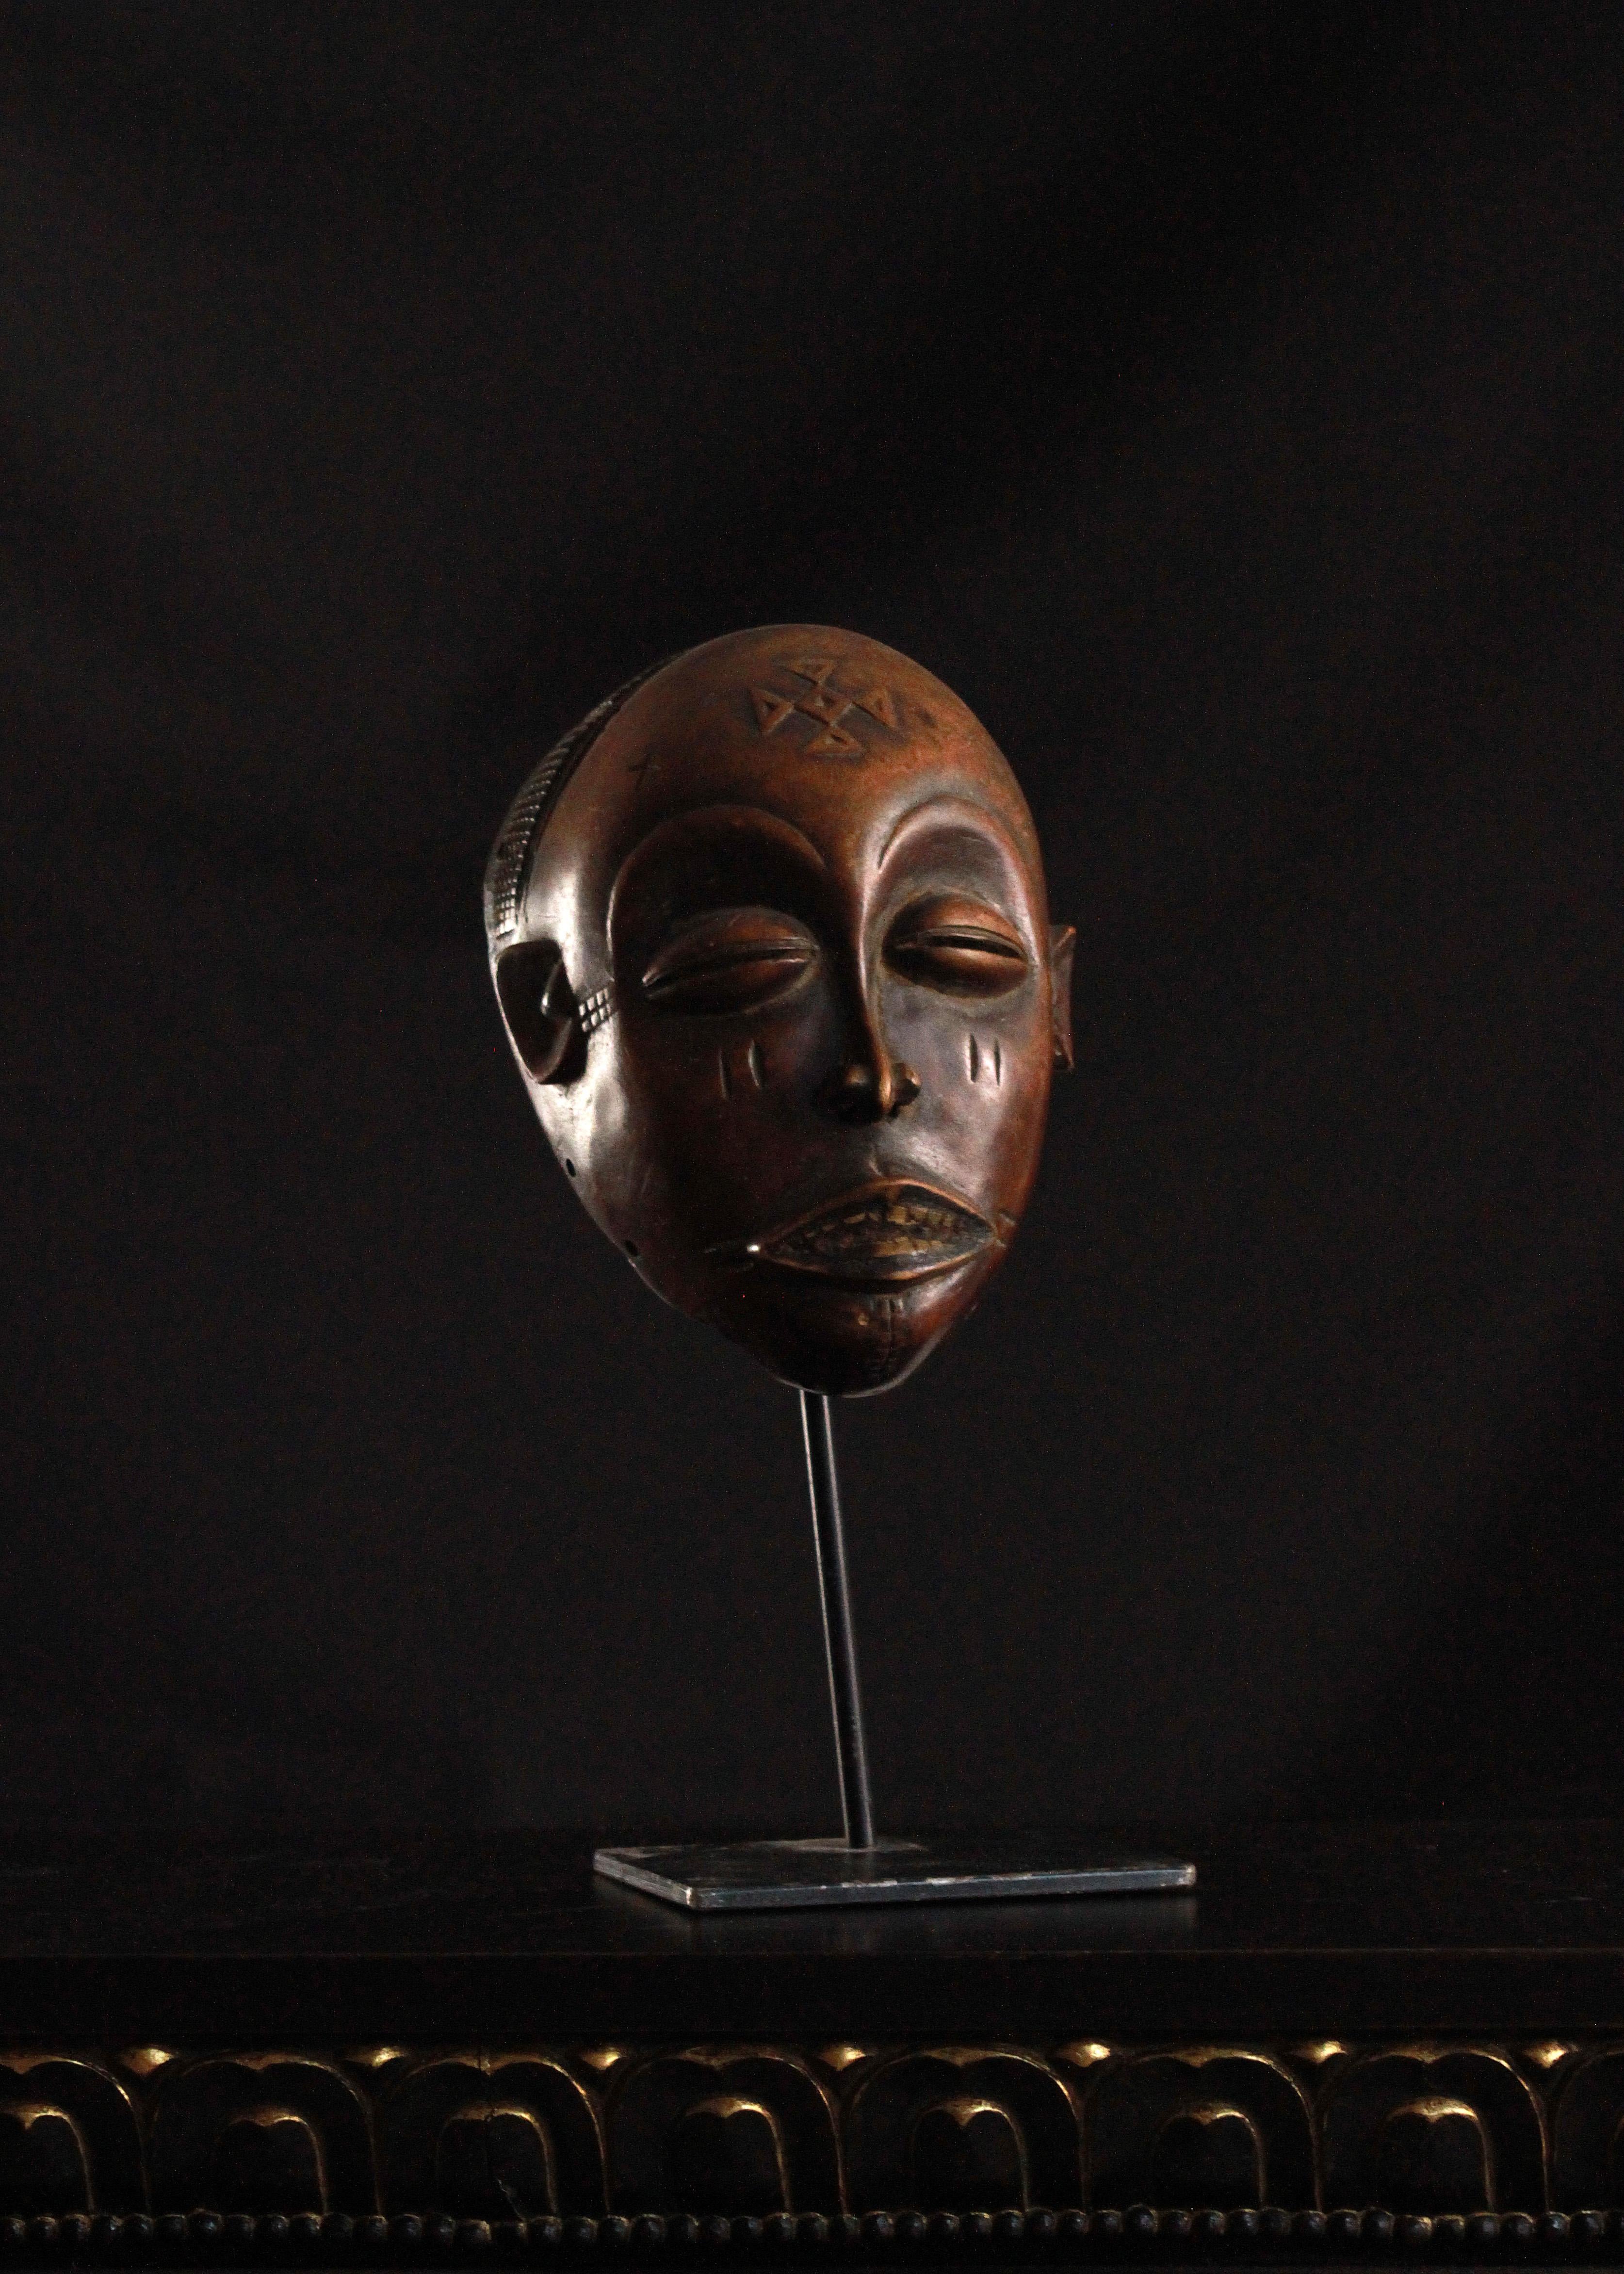 This exquisite mask, meticulously crafted by the Chokwe people, embodies both spiritual power and artistic finesse. Its design, rooted in tradition, carries layers of meaning that resonate through time.

Mwana Pwo: The Young Woman
The mask portrays